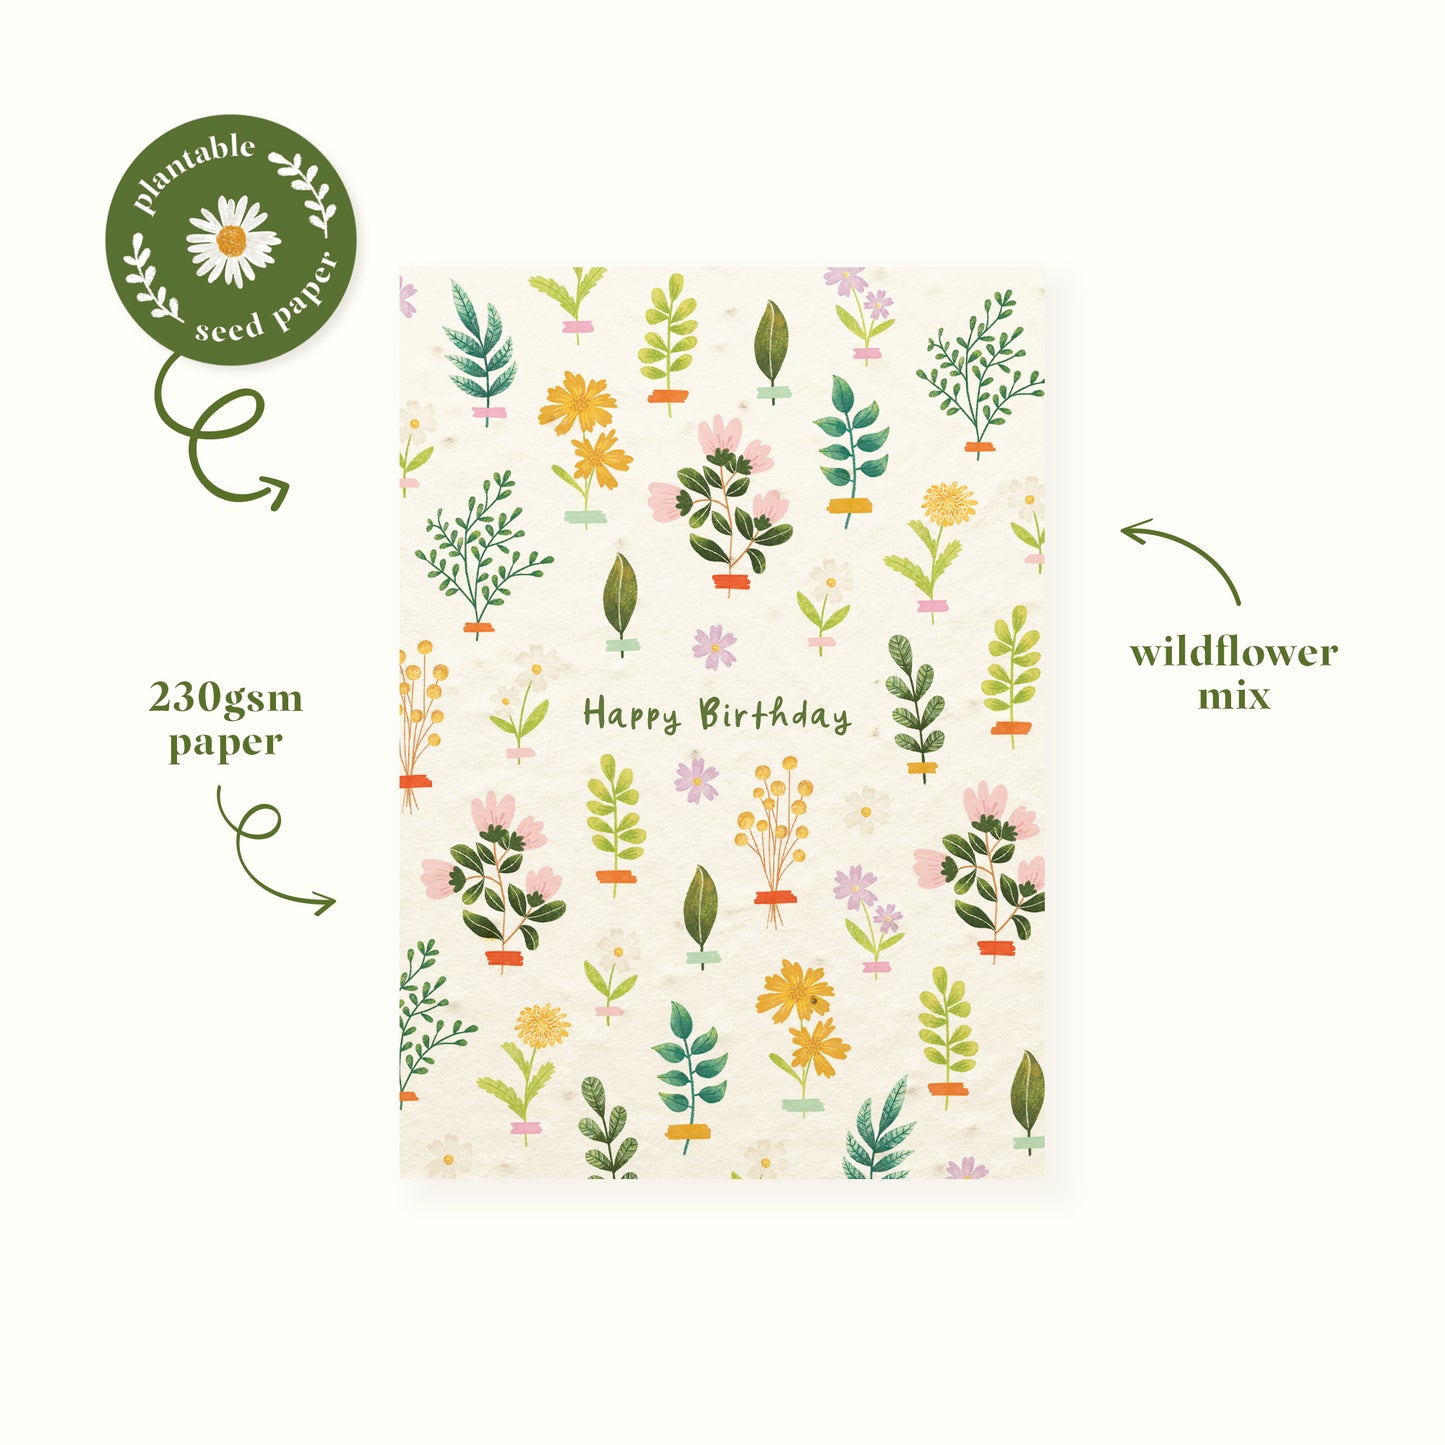 Plantable birthday card with wildflower mix